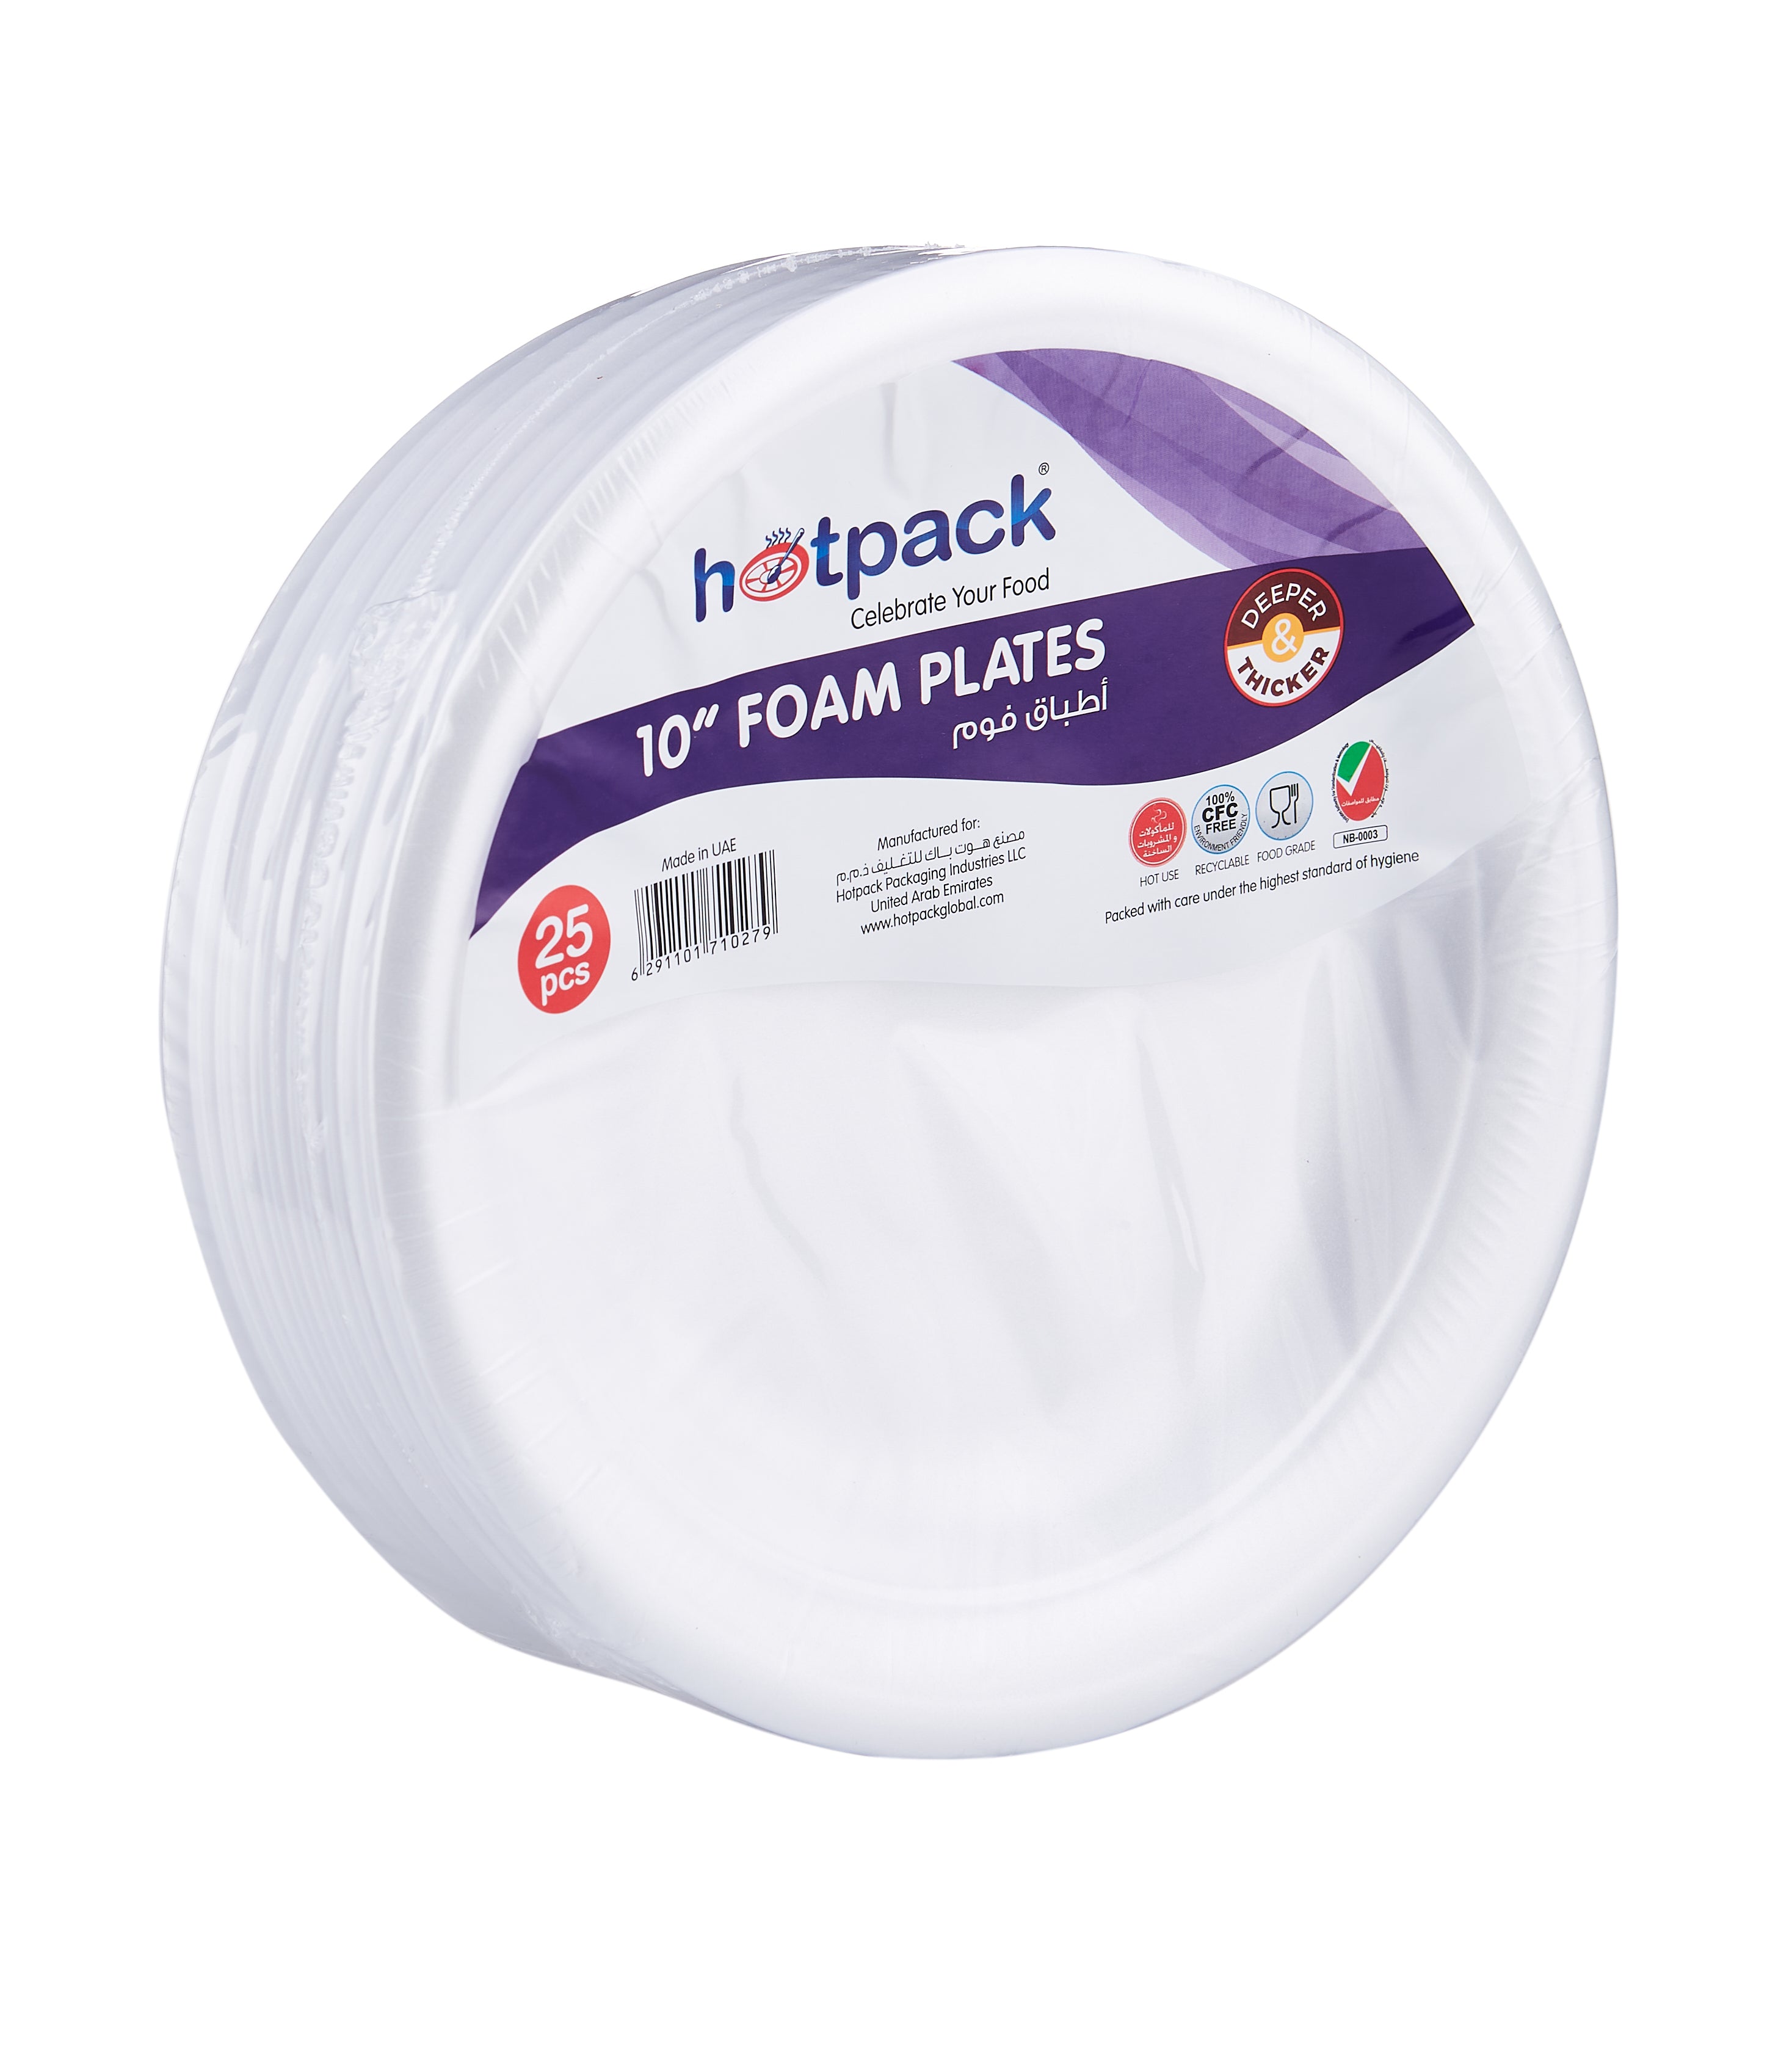 Round Foam Plate 10 Inch Buy One Get One Free 25 Pieces x 2 Packets